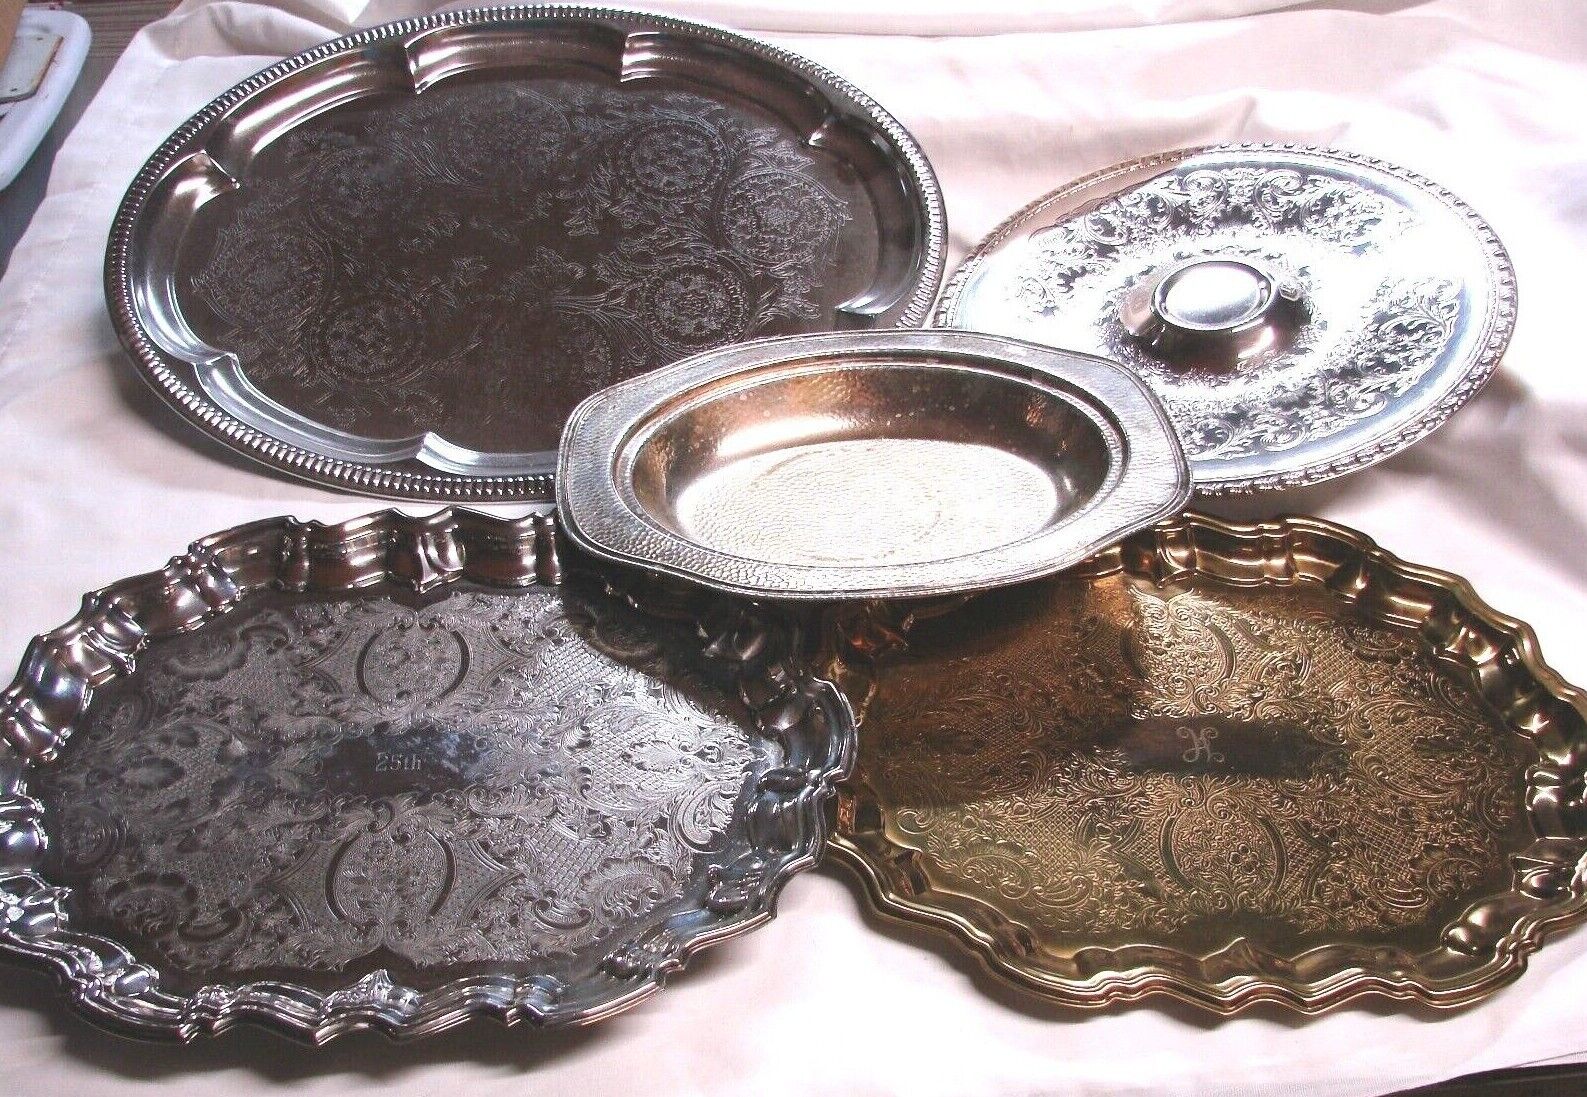 5 SILVERPLATE SERVING TRAYS / PLATTERS --- ONE IS GOLD COLOR